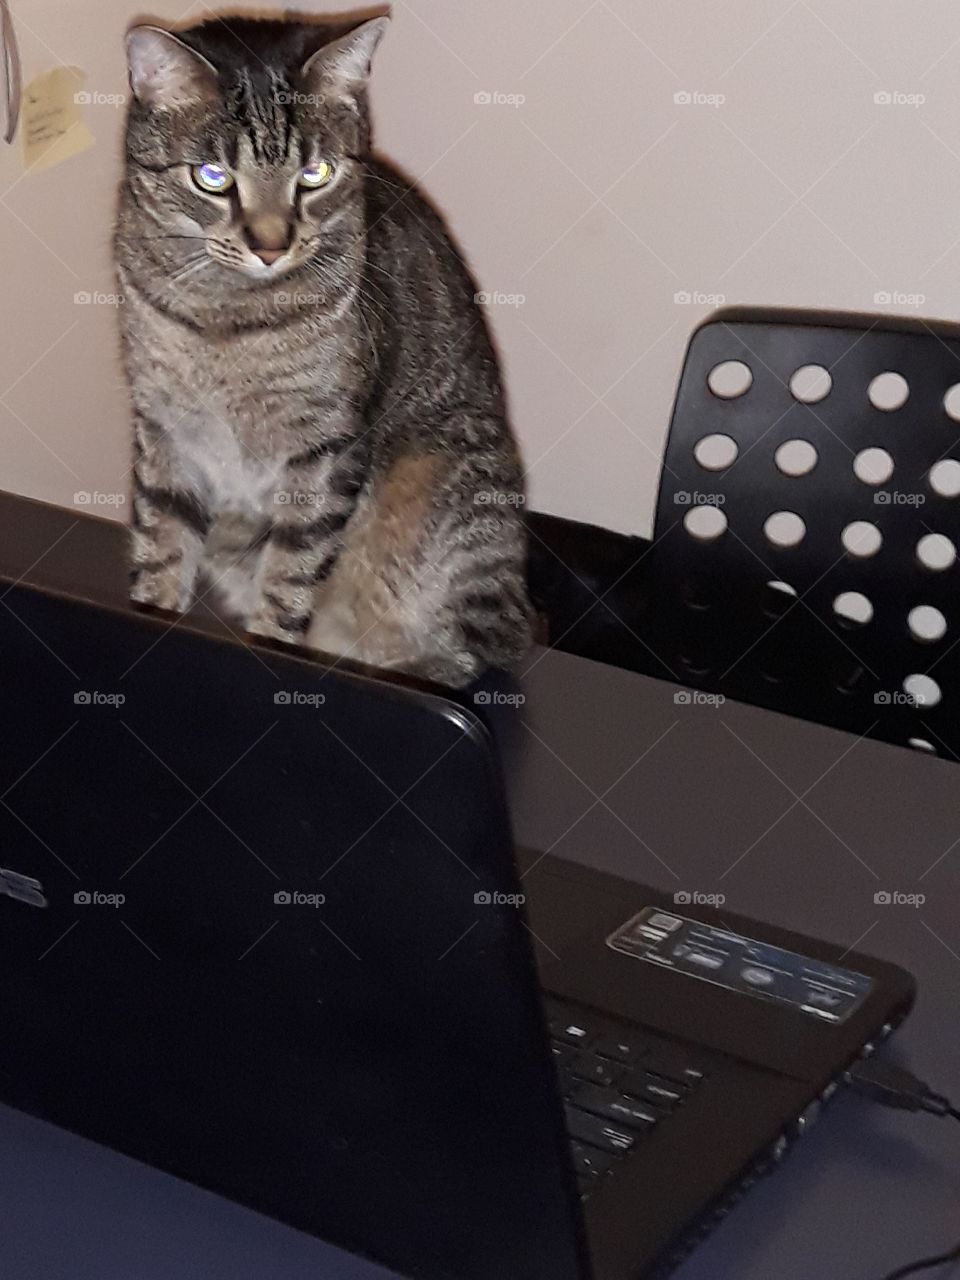 working hard, cat, pet, striped cat, table, chair, home office, work office, notebook, asus, asus notebook, lazy cat, boring cat, boring home office, officers, give me a work, black, white wall, office, office cat, office cat